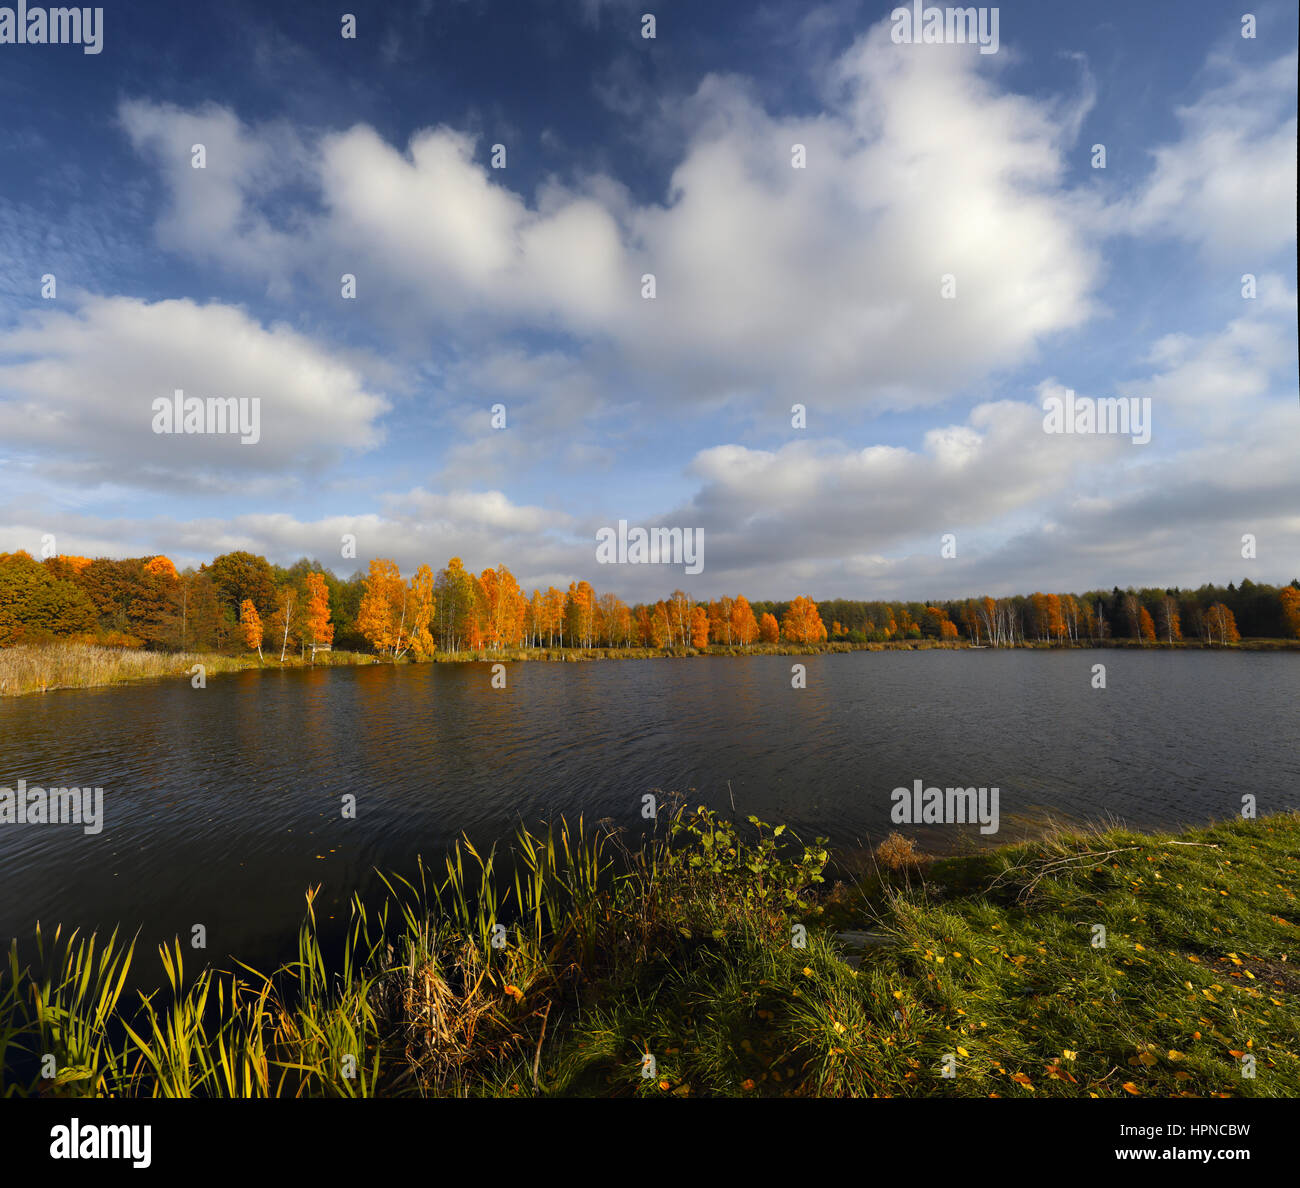 Trees with yellow leaves on the lake shore under blue sky Stock Photo